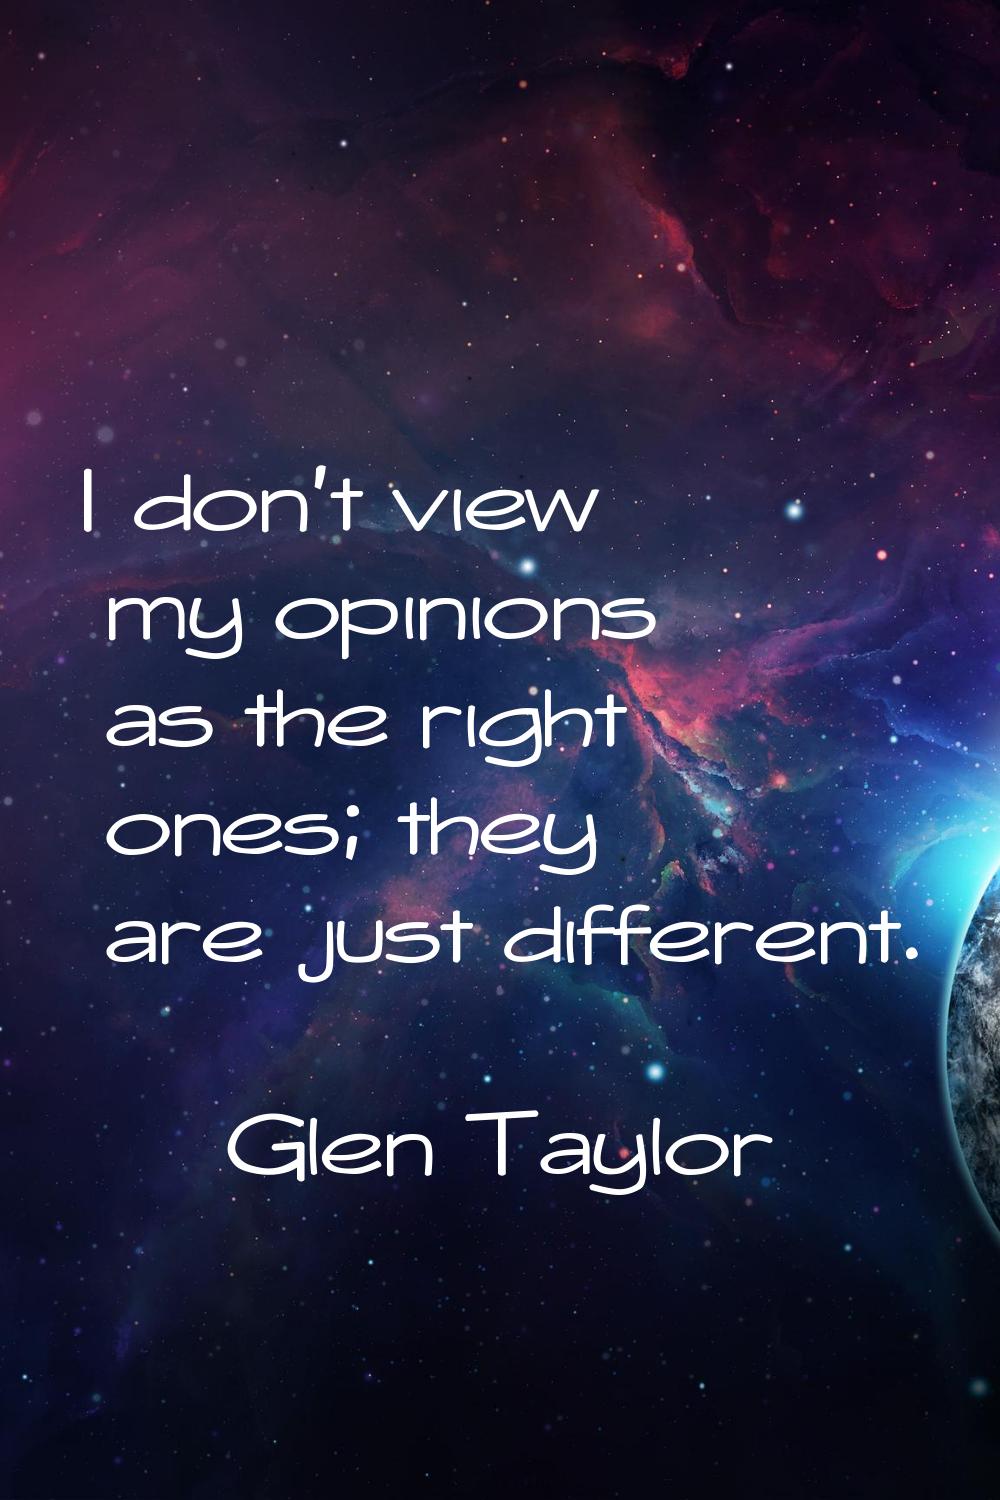 I don't view my opinions as the right ones; they are just different.